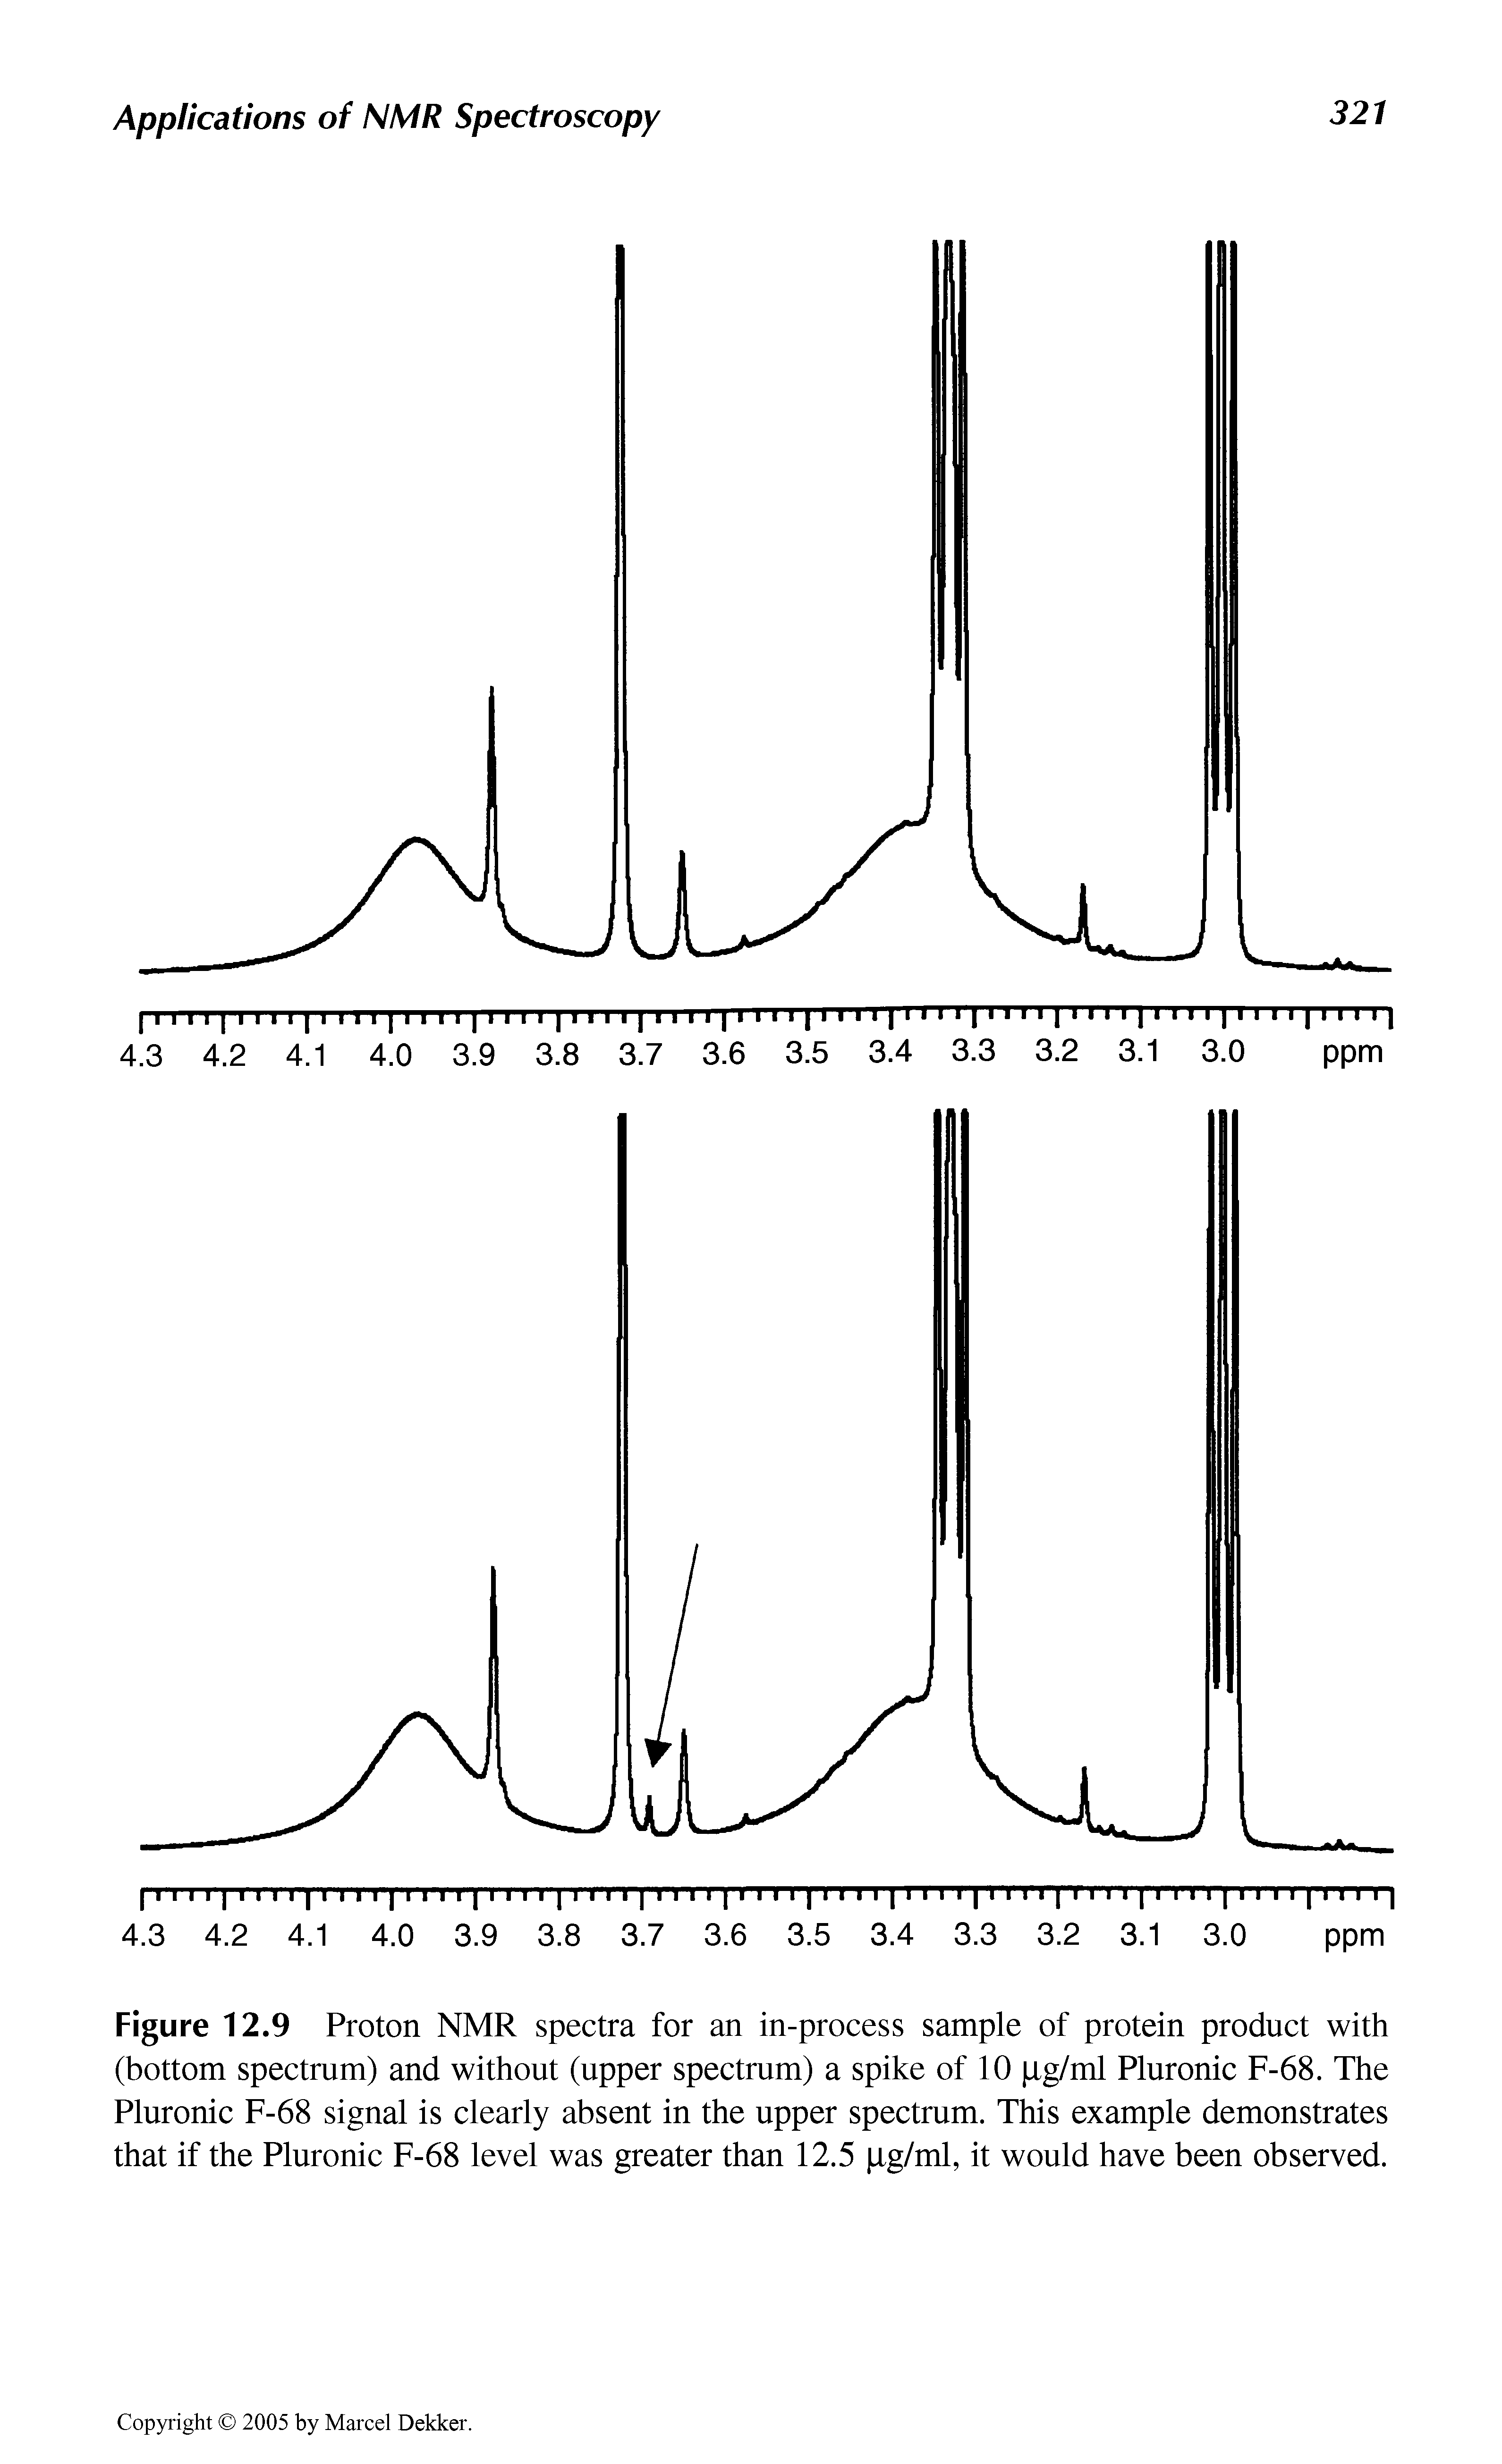 Figure 12.9 Proton NMR spectra for an in-process sample of protein product with (bottom spectrum) and without (upper spectrum) a spike of 10 ag/ml Pluronic F-68. The Pluronic F-68 signal is clearly absent in the upper spectrum. This example demonstrates that if the Pluronic F-68 level was greater than 12.5 pg/ml, it would have been observed.